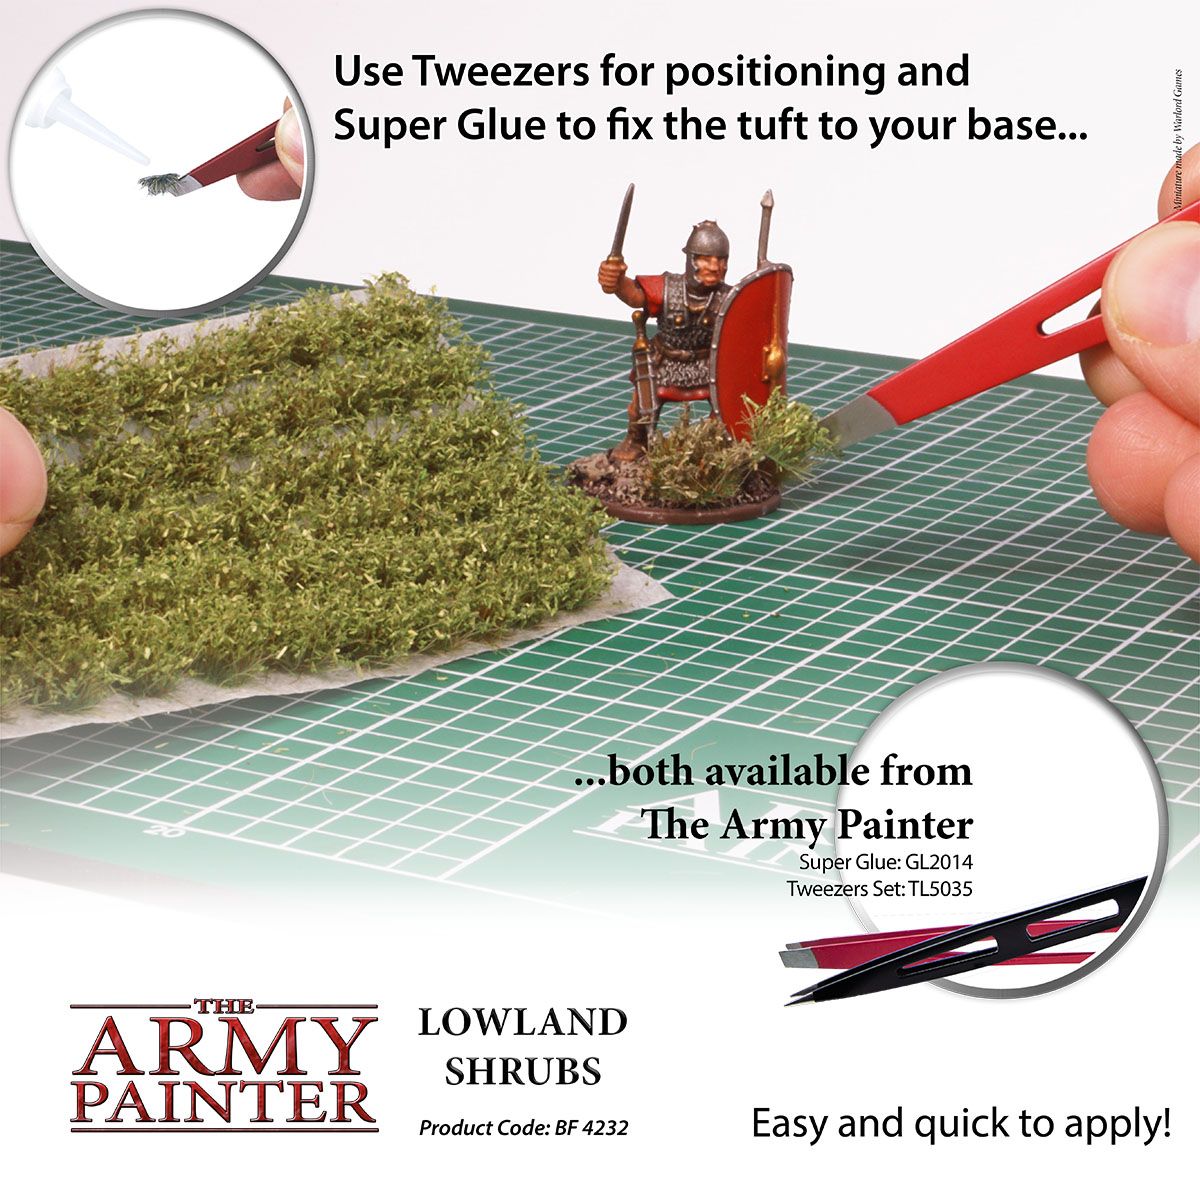 Lowland Shrubs (The Army Painter)